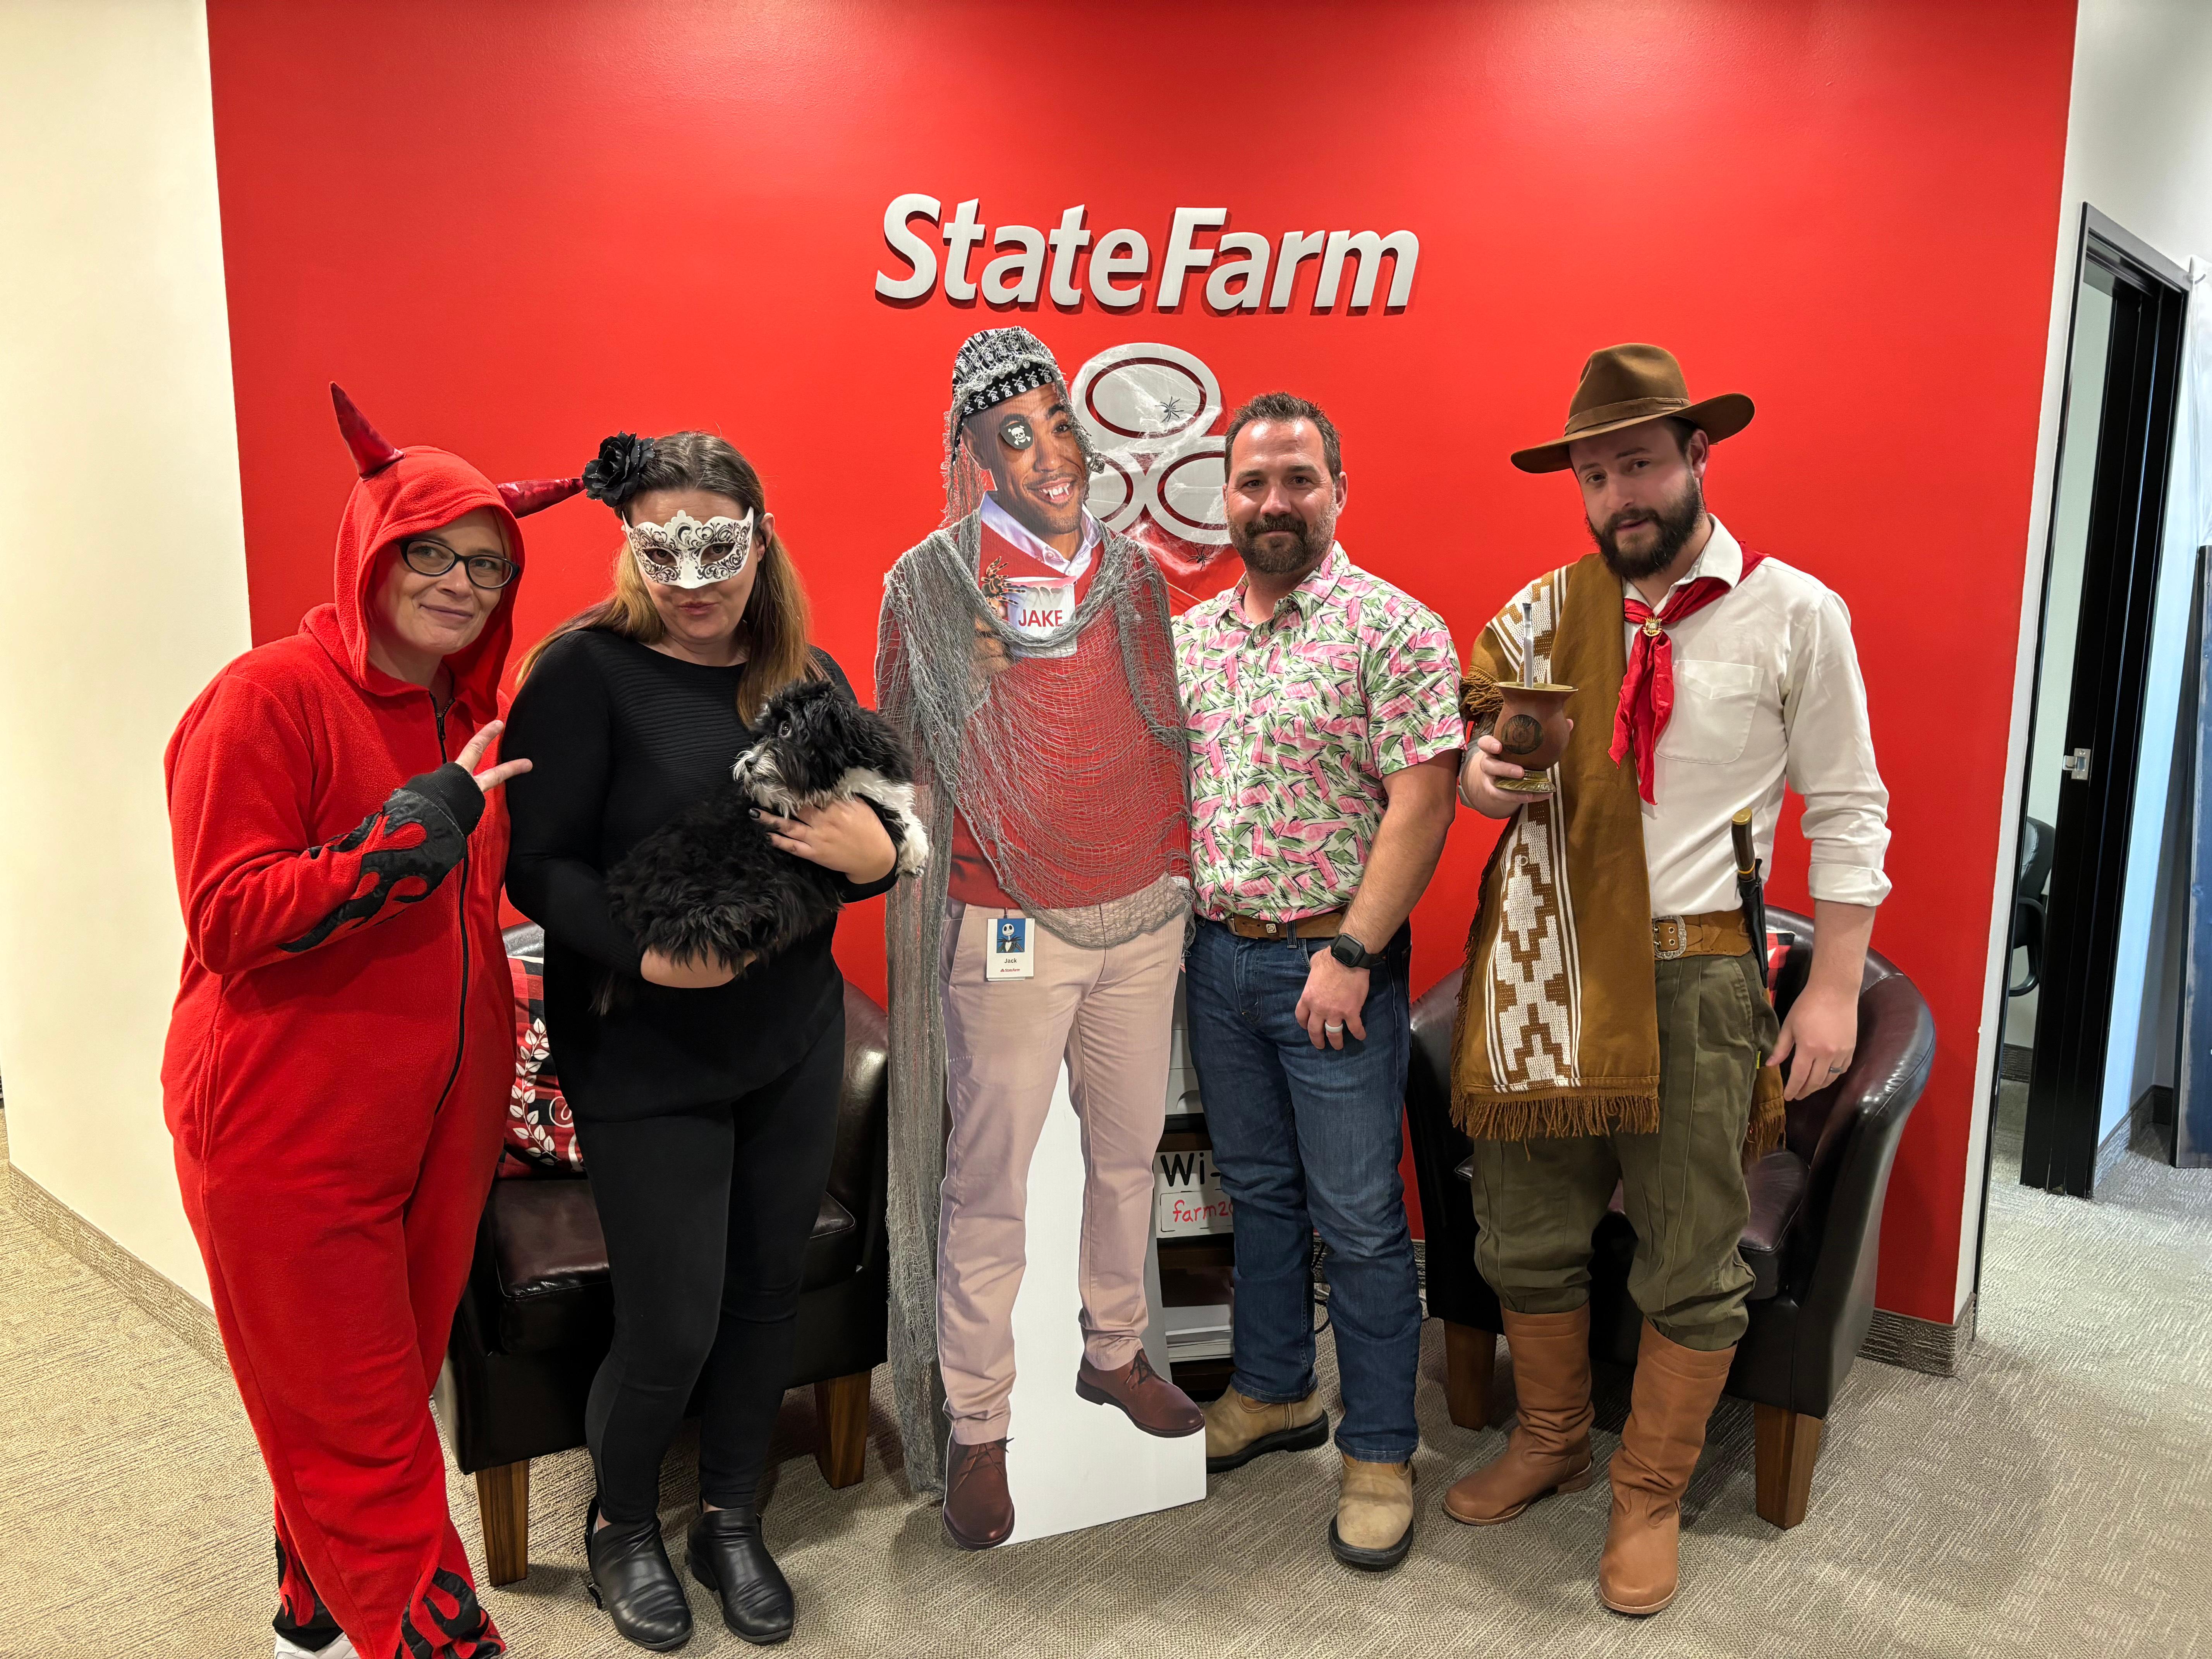 Happy Halloween from the Nick Ainsworth State Farm Insurance team!